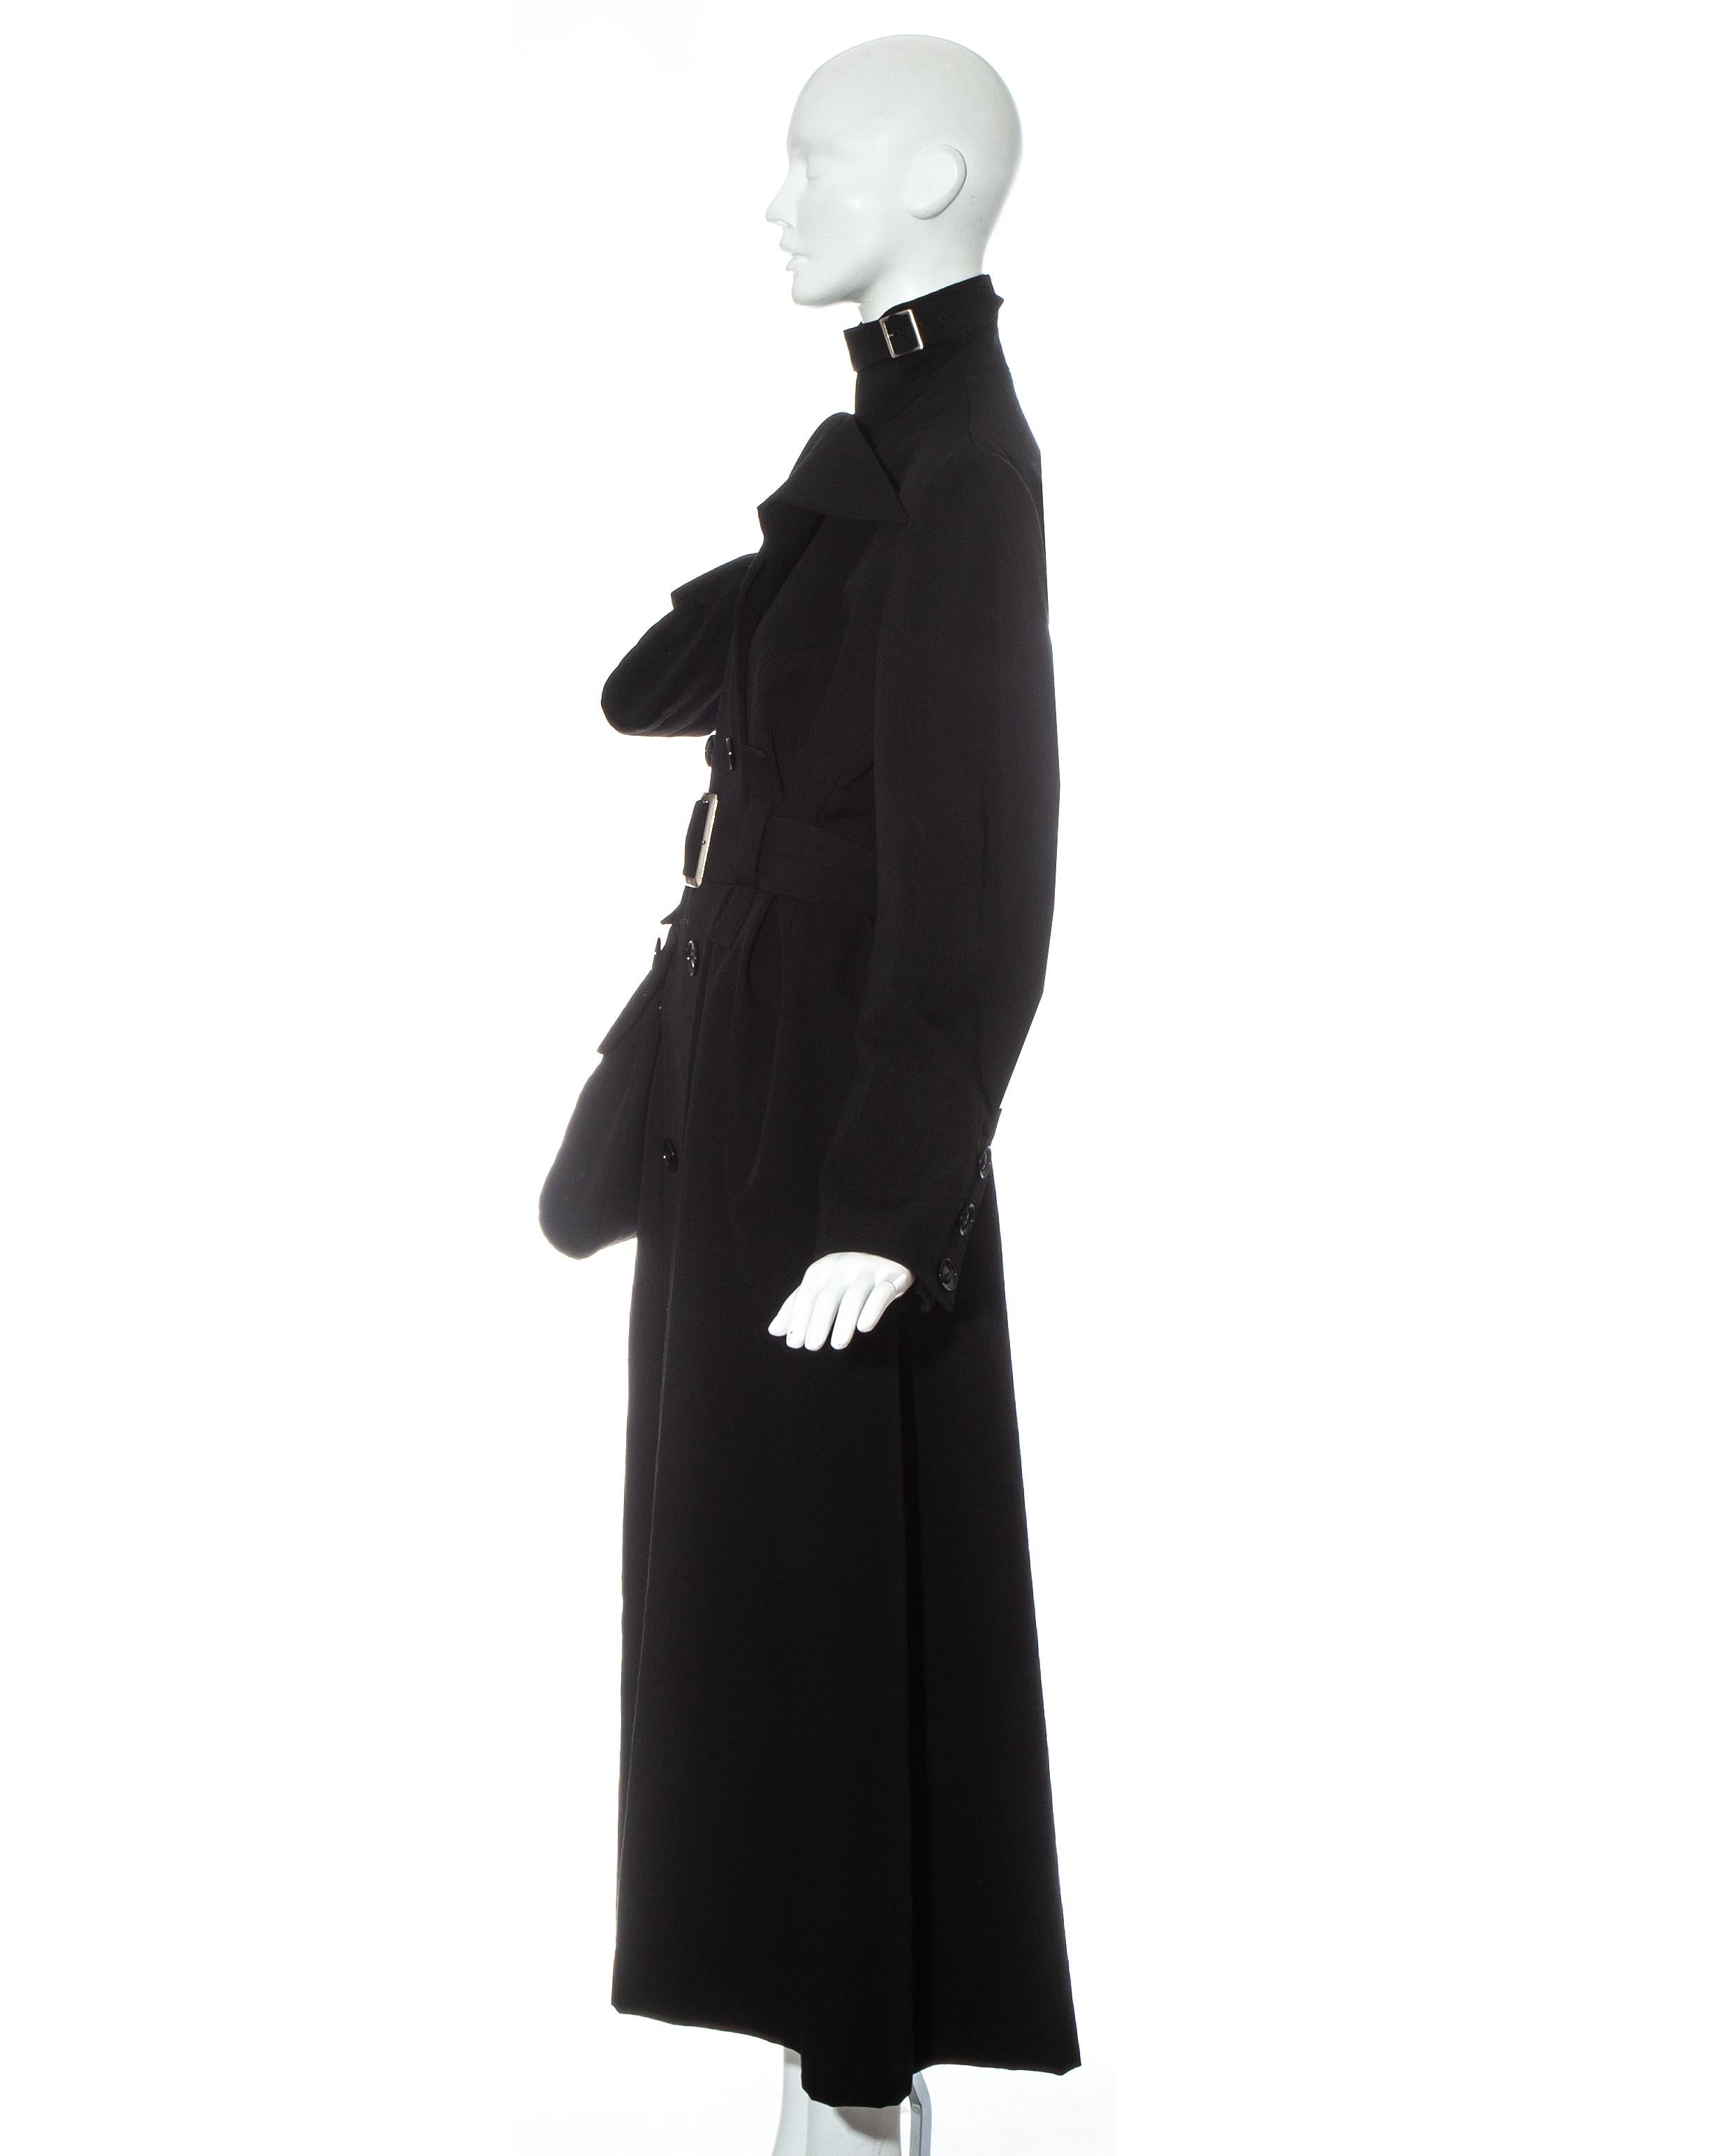 Yohji Yamamoto black wool gabardine coat with exaggerated pockets, fw 2004 In Excellent Condition For Sale In London, GB